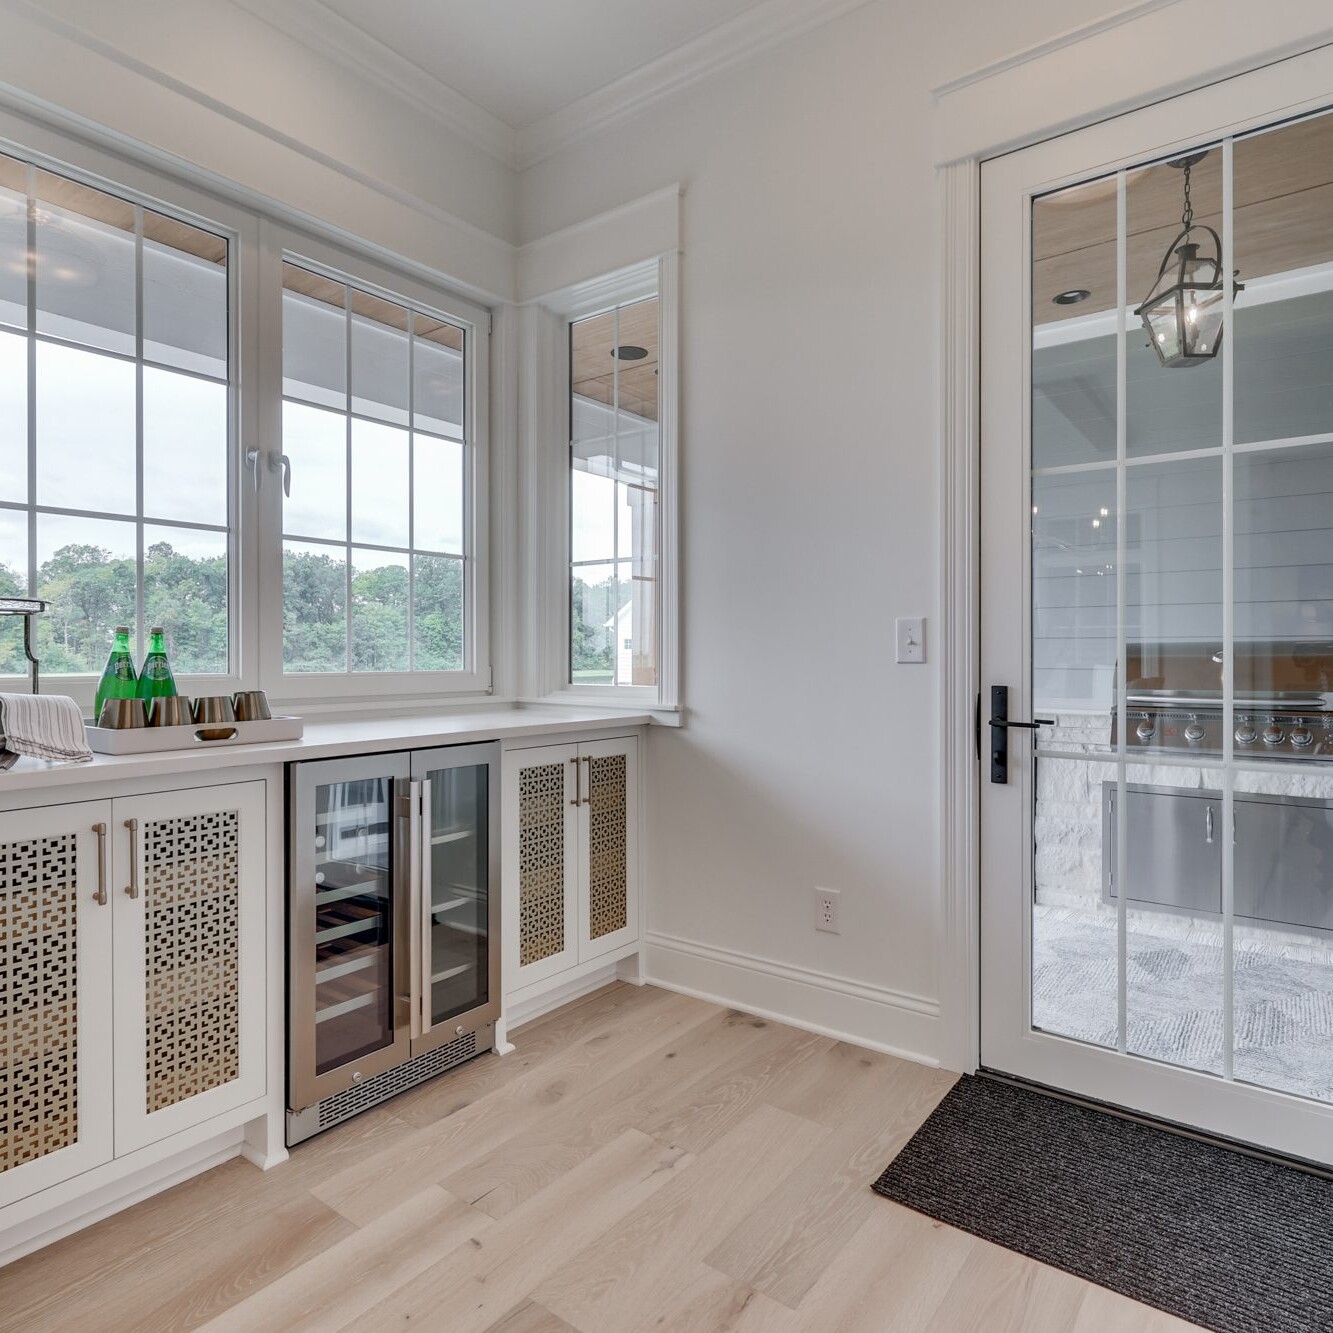 A white kitchen with a glass door and wood floors.